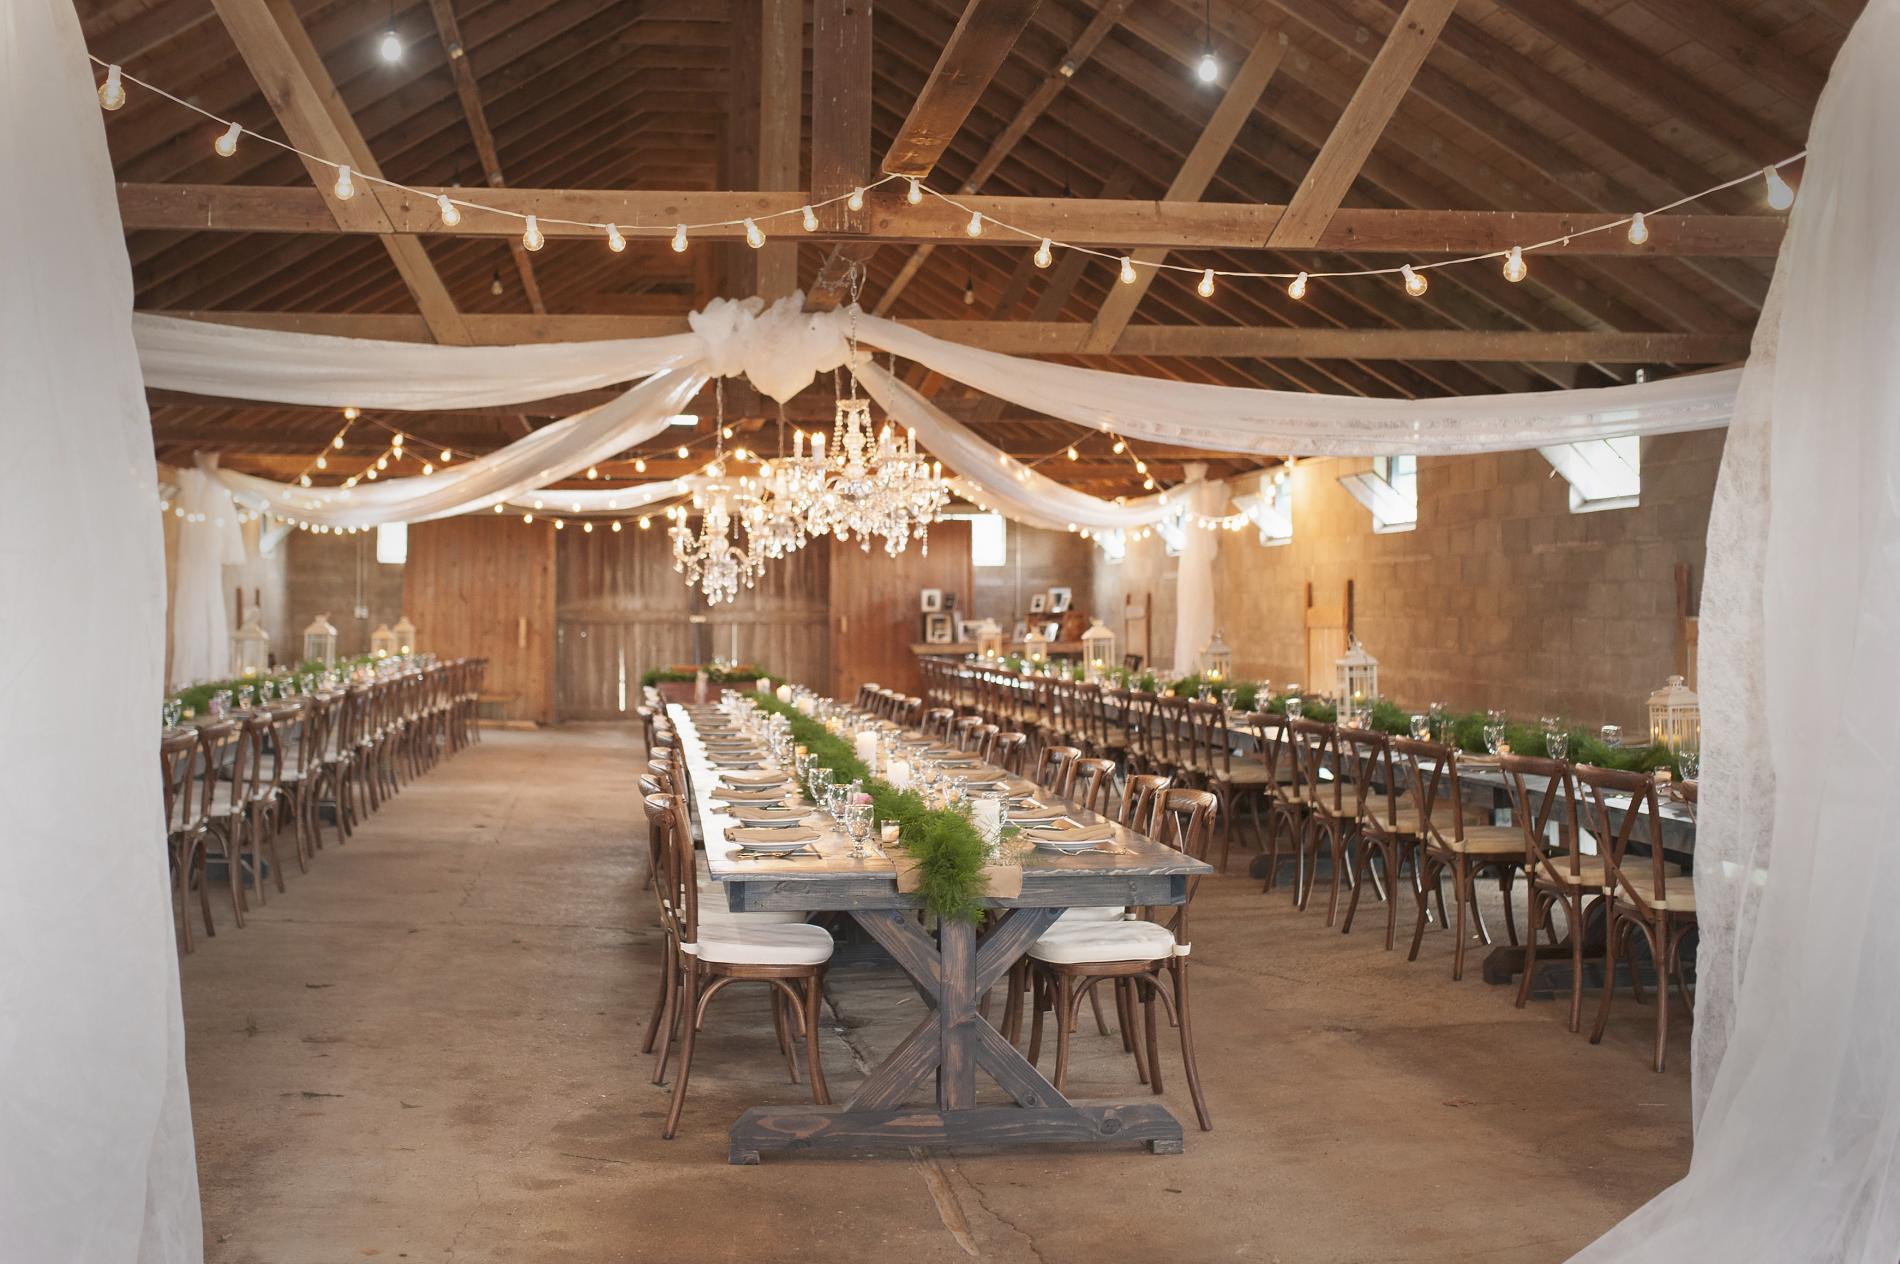 The Best Barn Venues in the Midwest: The 2019 Guide for Indiana Wedding